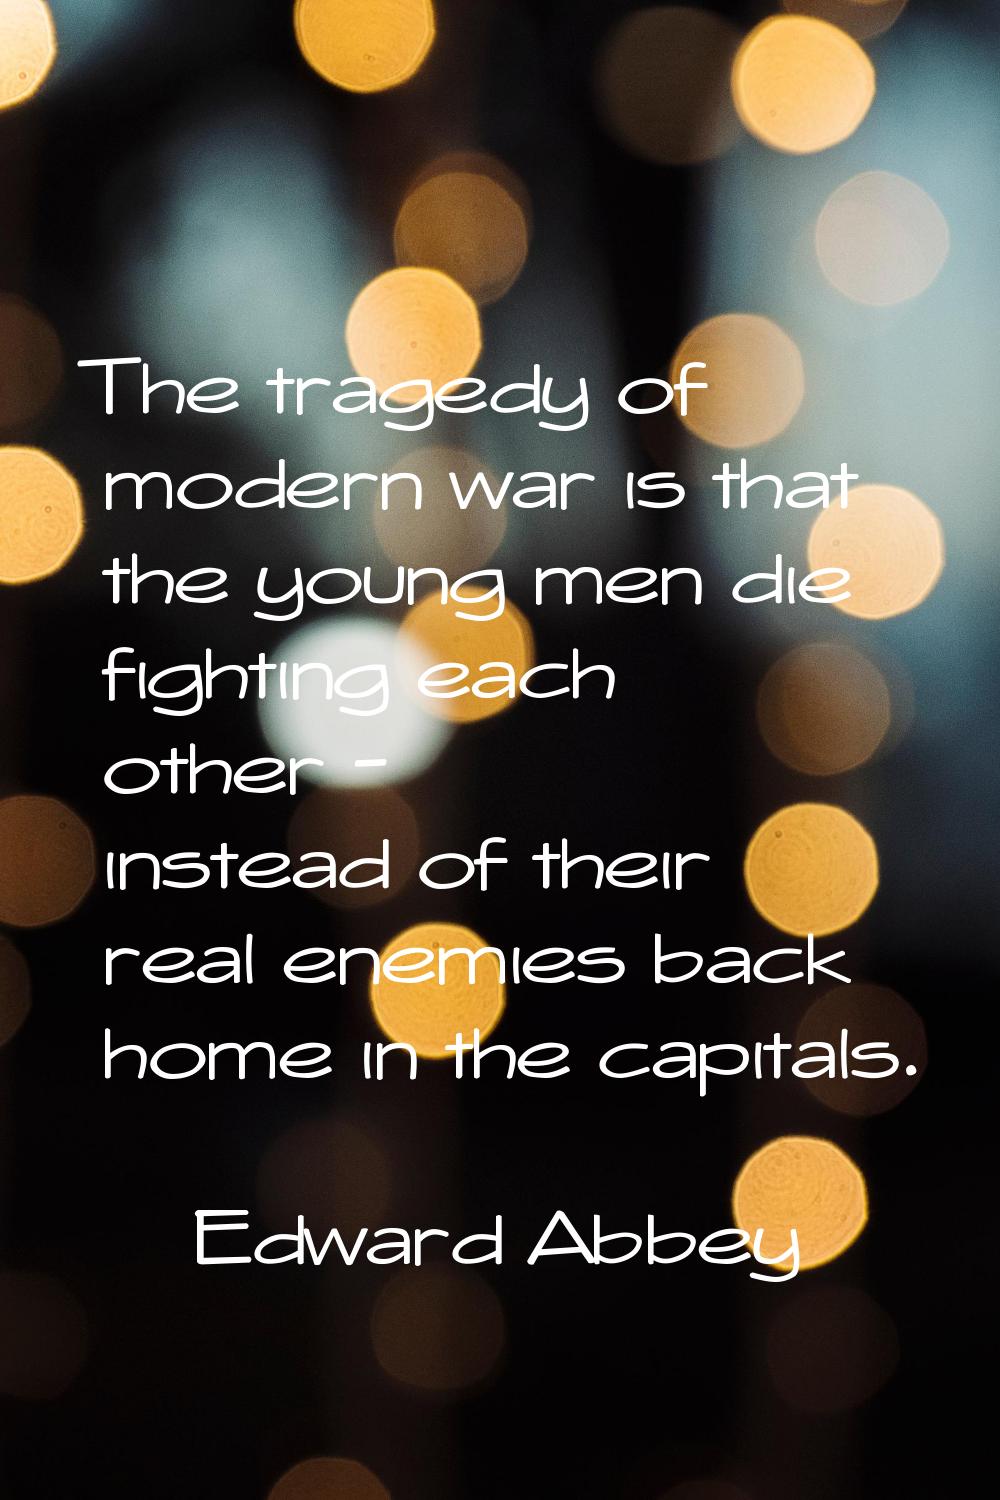 The tragedy of modern war is that the young men die fighting each other - instead of their real ene